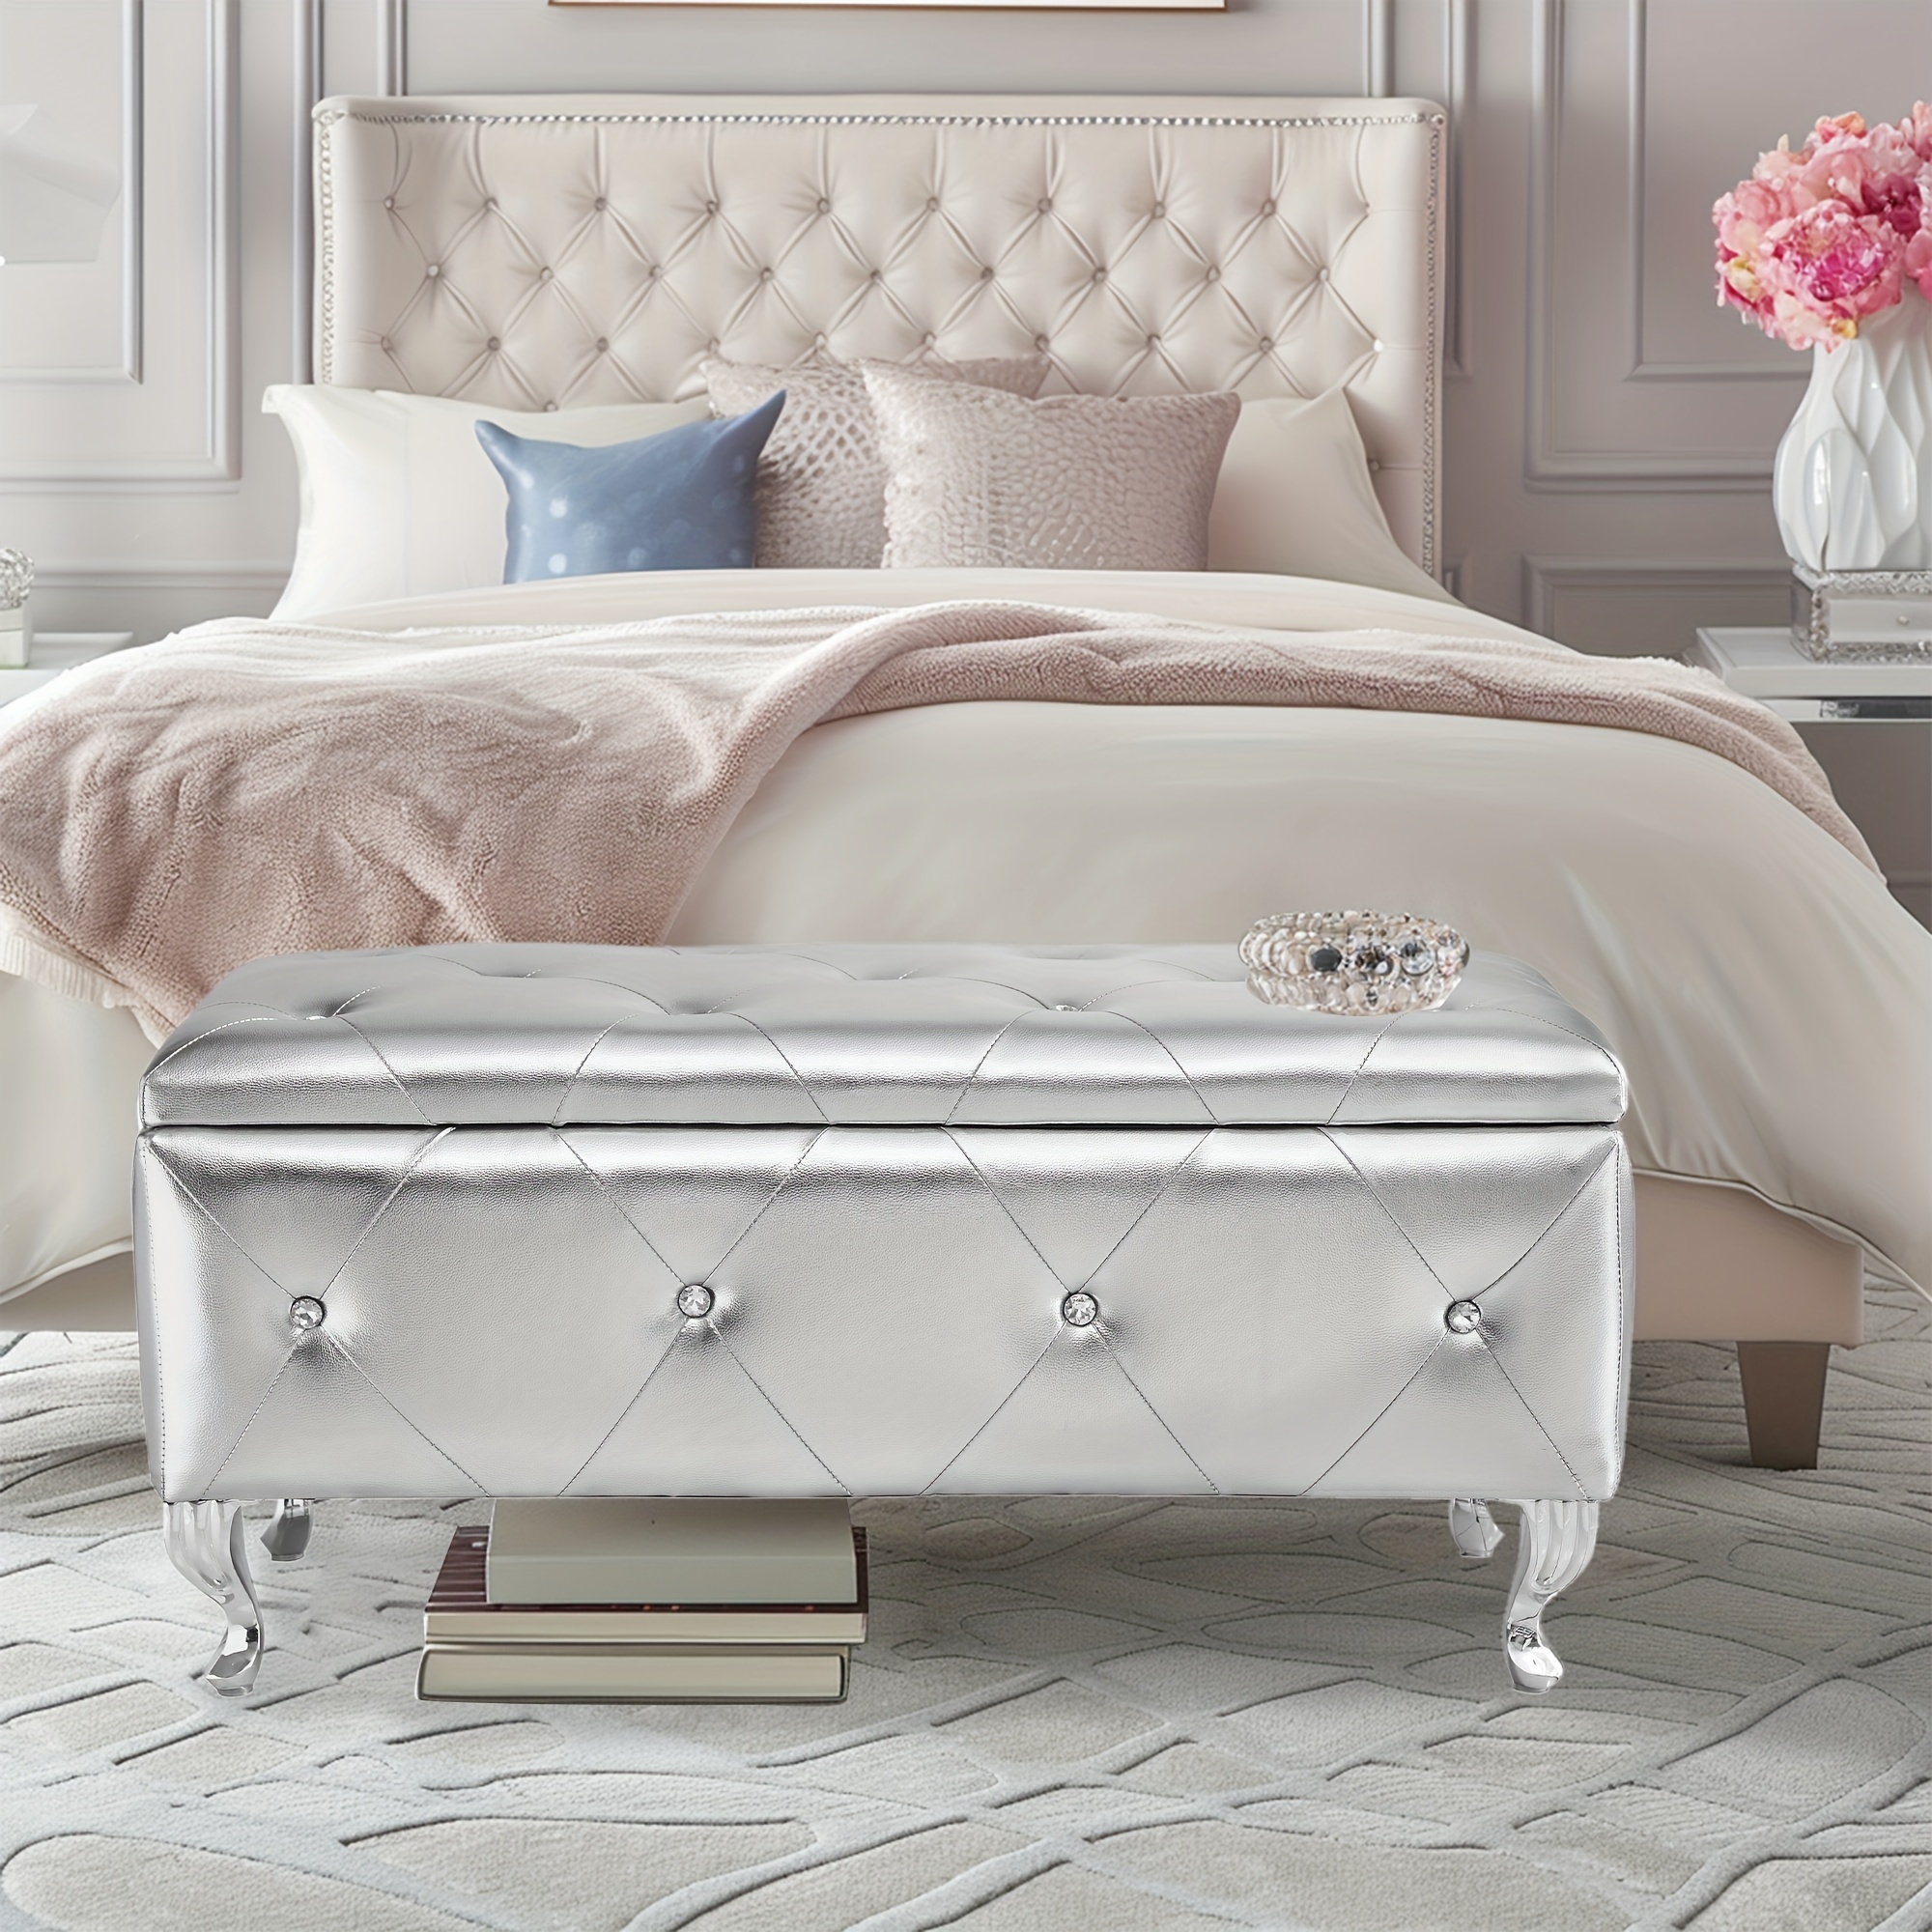 

Upholstered Storage Ottoman Bench For Bedroom End Of Bed Faux Leather Rectangular Footrest With Crystal Buttons For Living Room Entryway (silver)